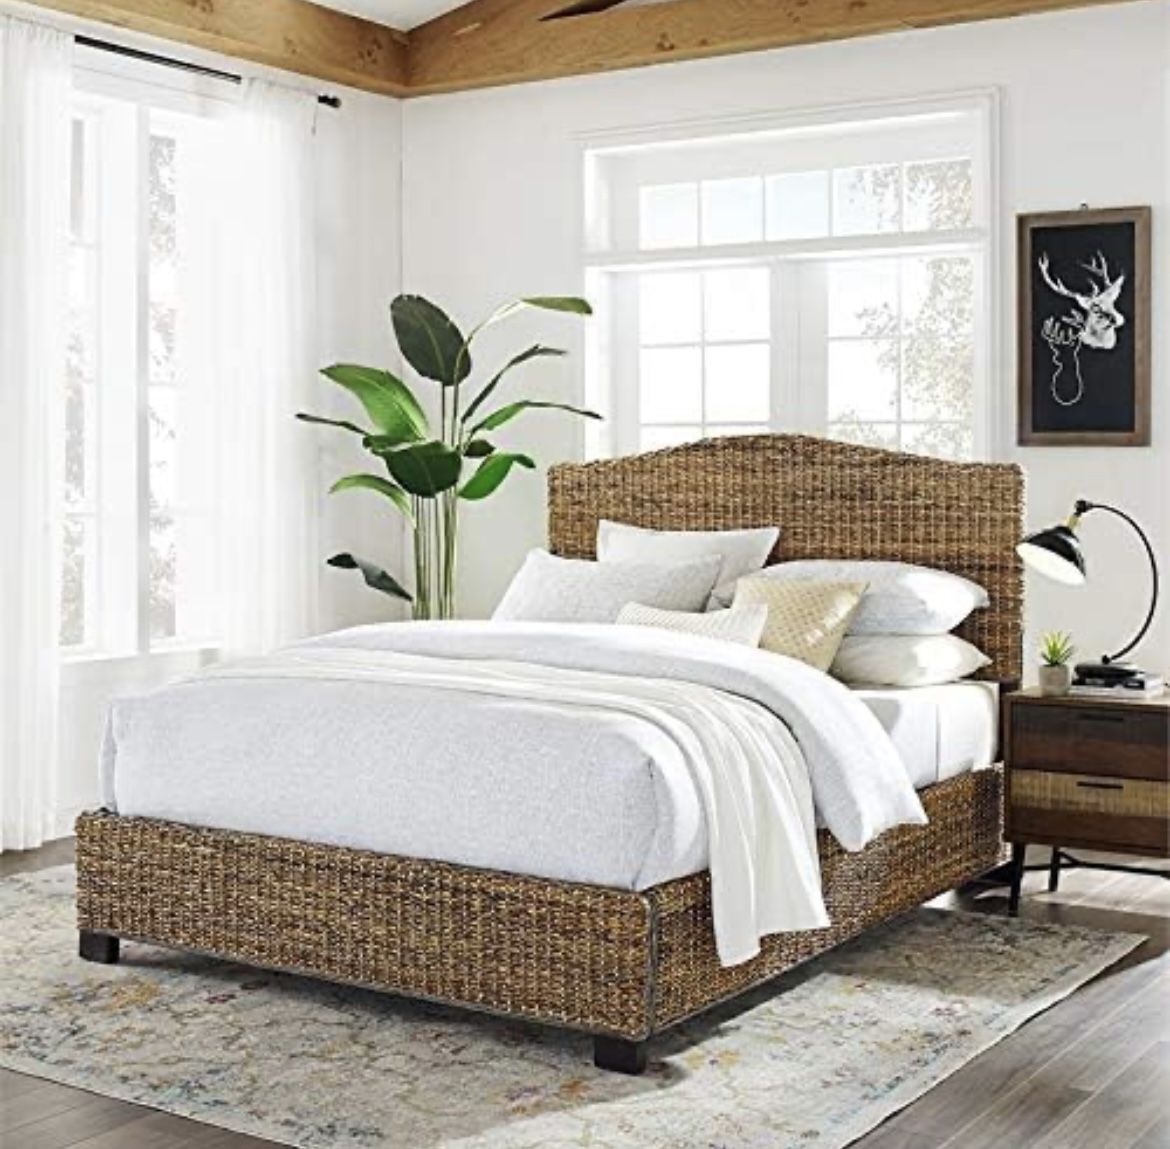 B-105 Farmhouse Wood/Banana Leaf Queen Panel Bed in Natural